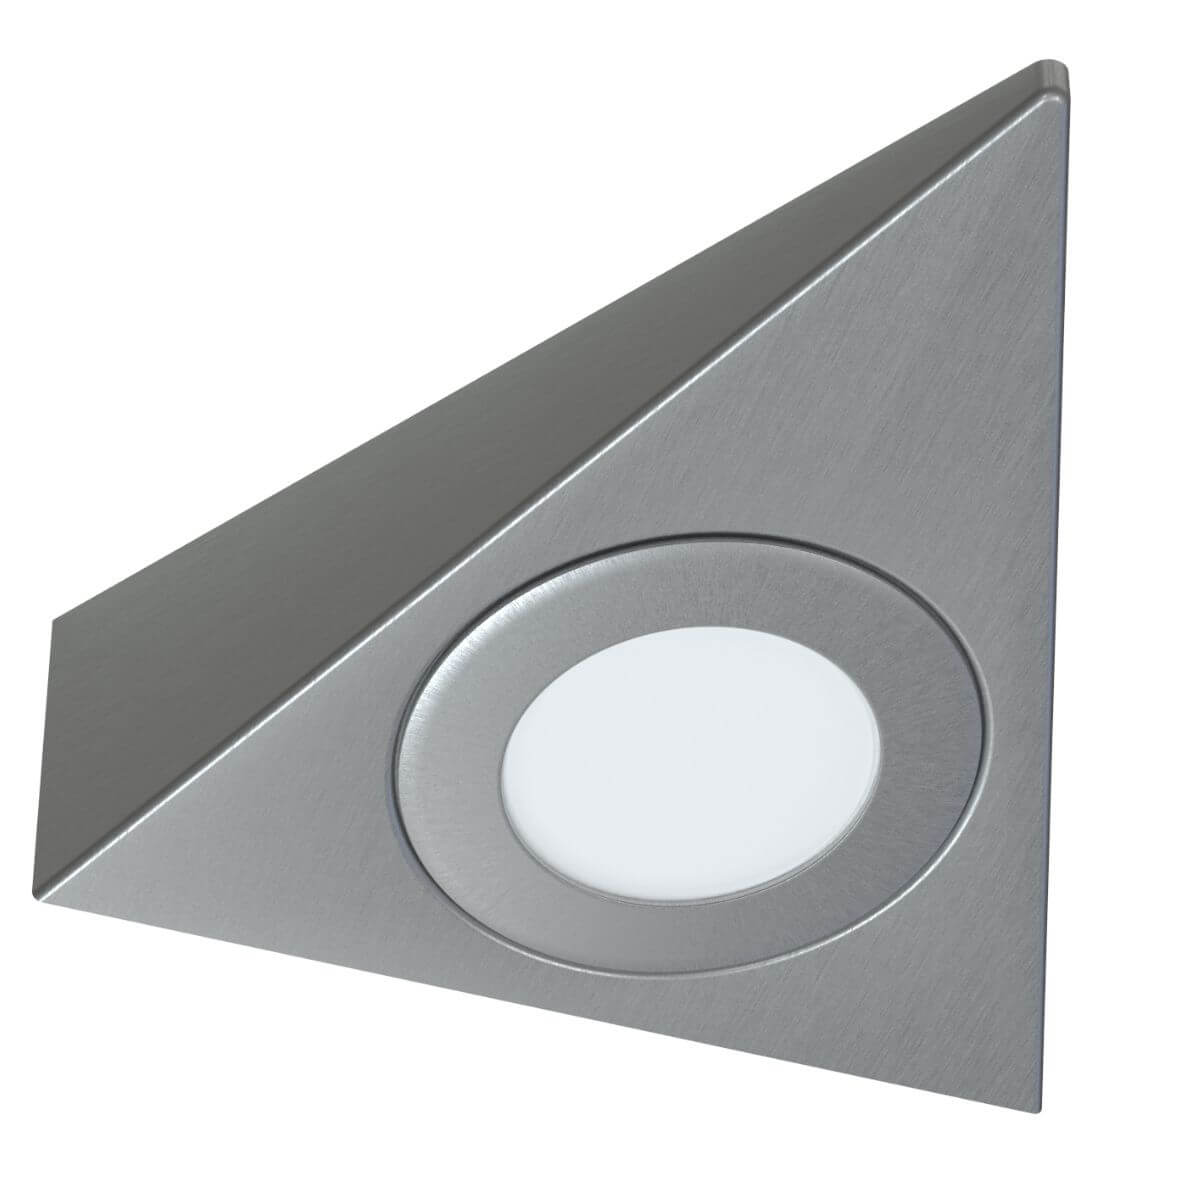 View High Brightness LED Triangle LED UnderCabinet Light Warm WhiteNatural White information